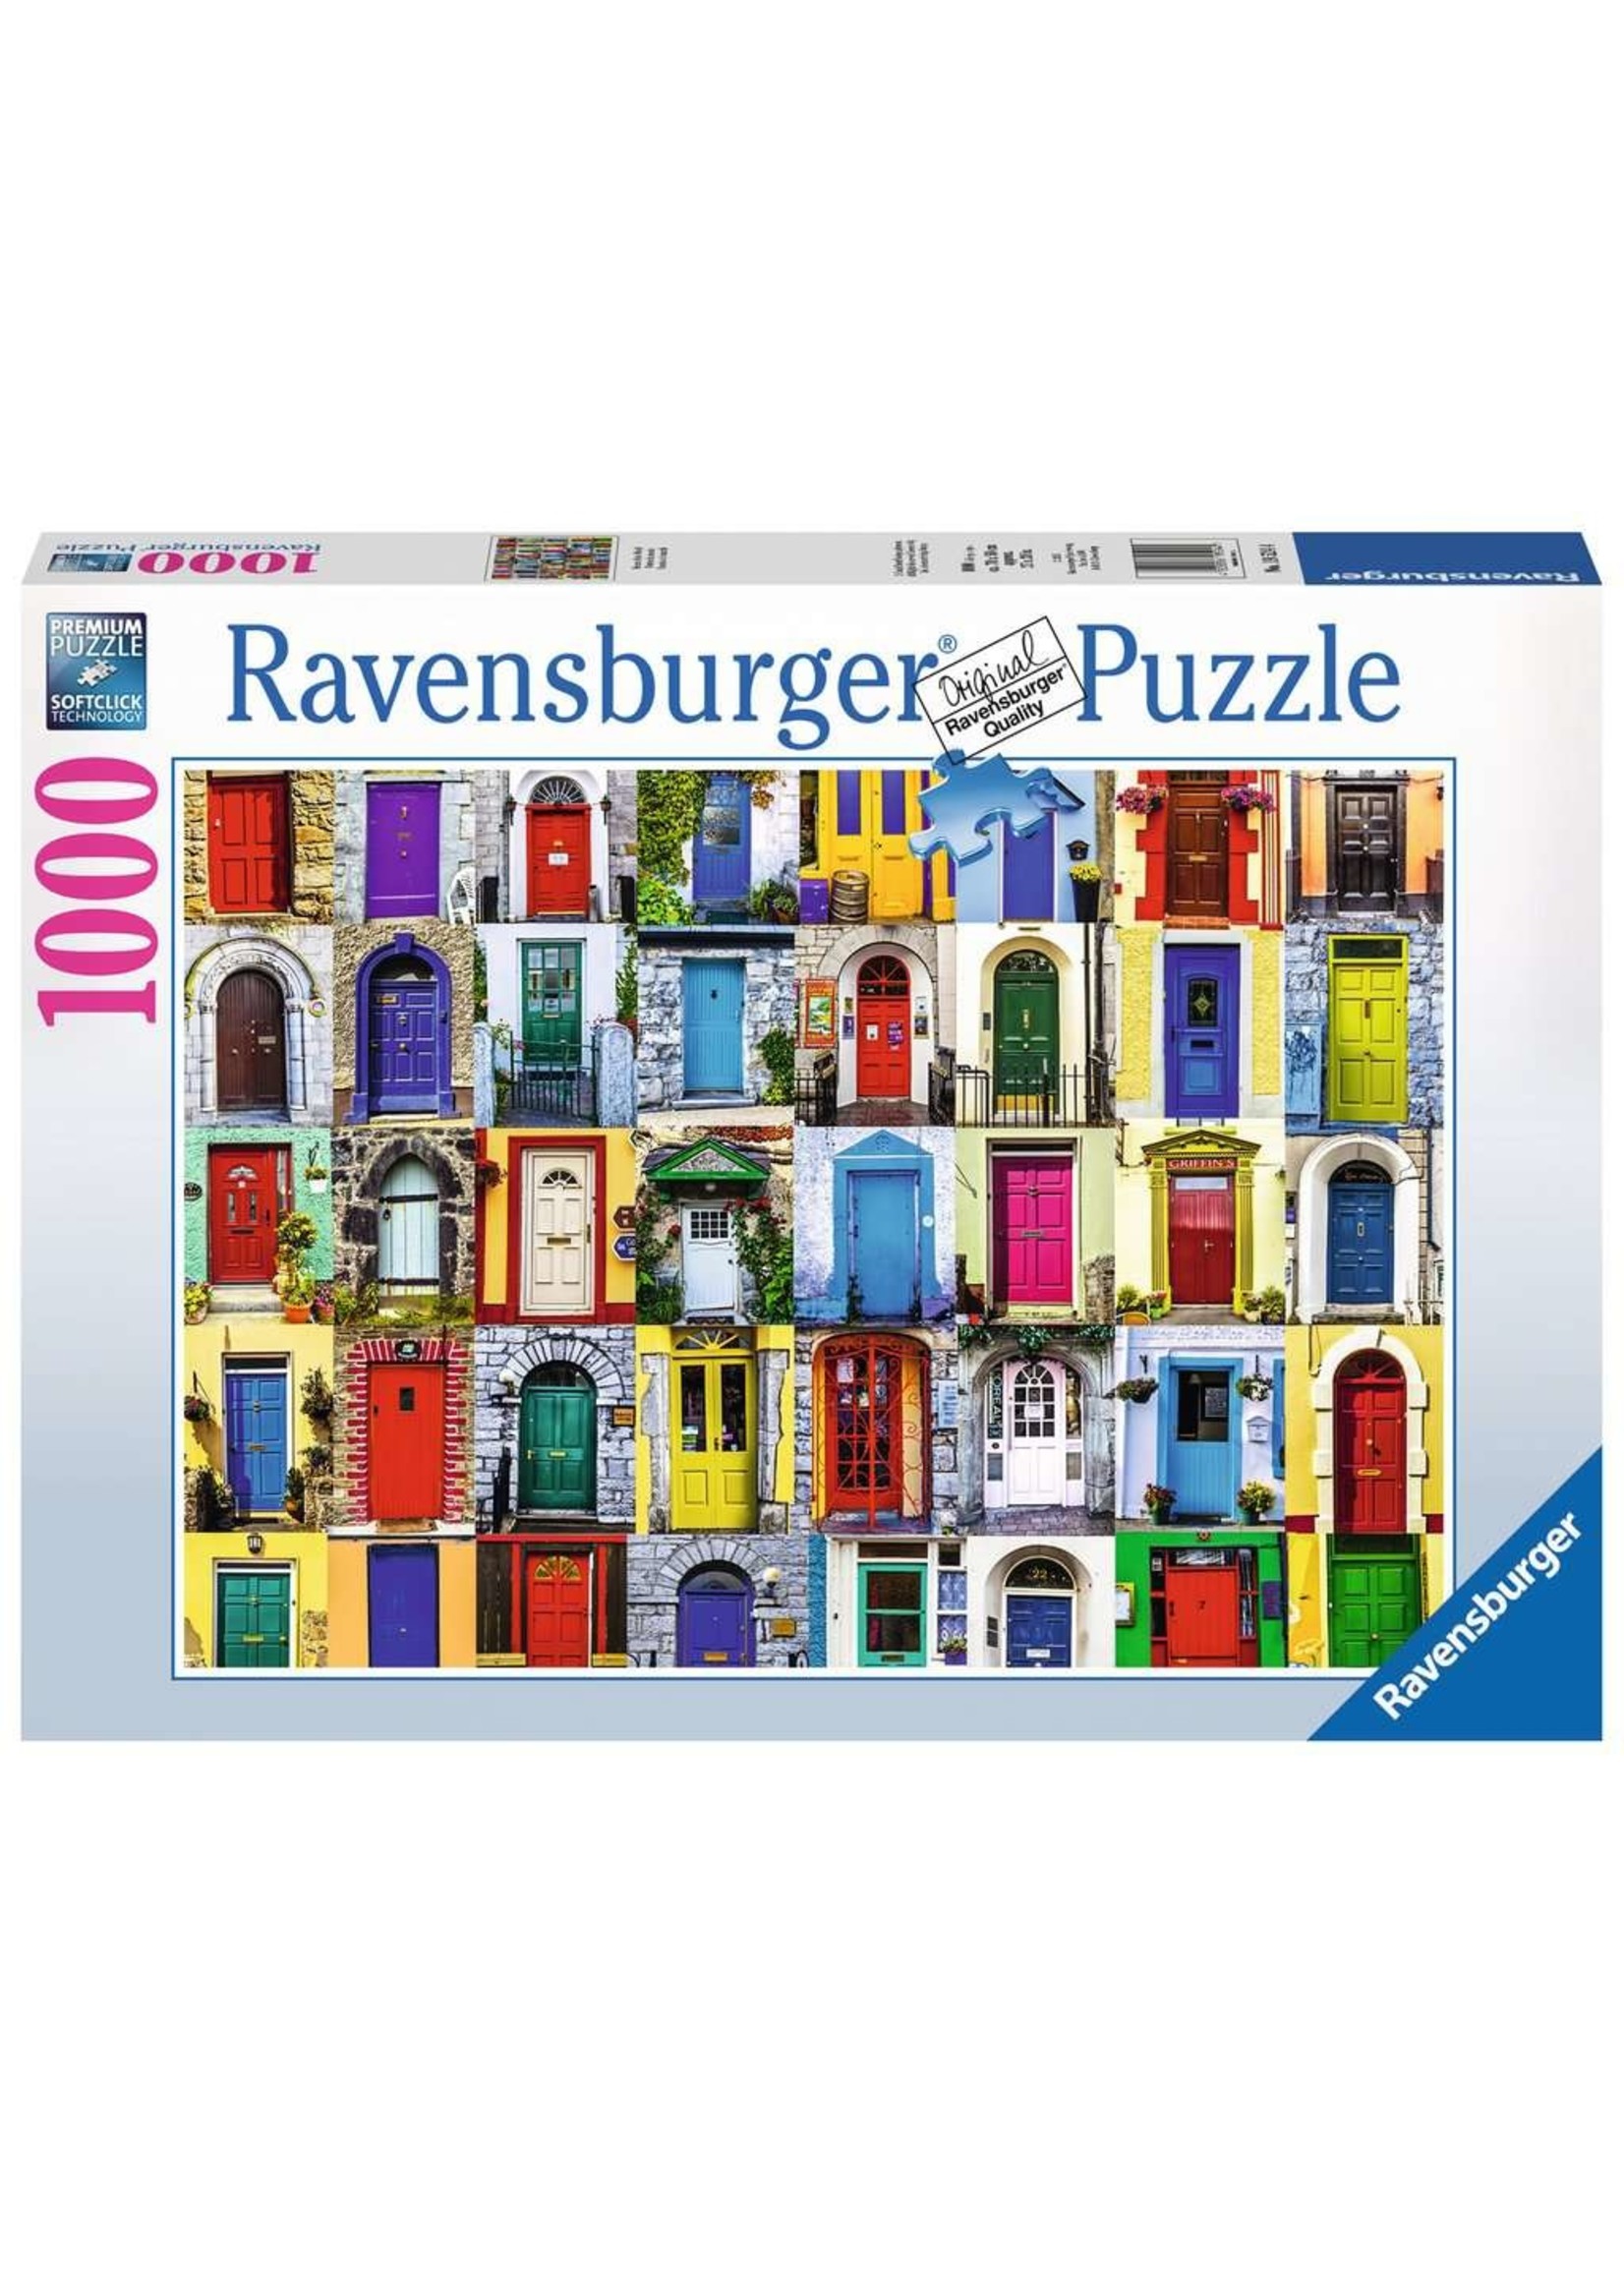 Ravensburger Doors of the World - 1000 Piece Puzzle